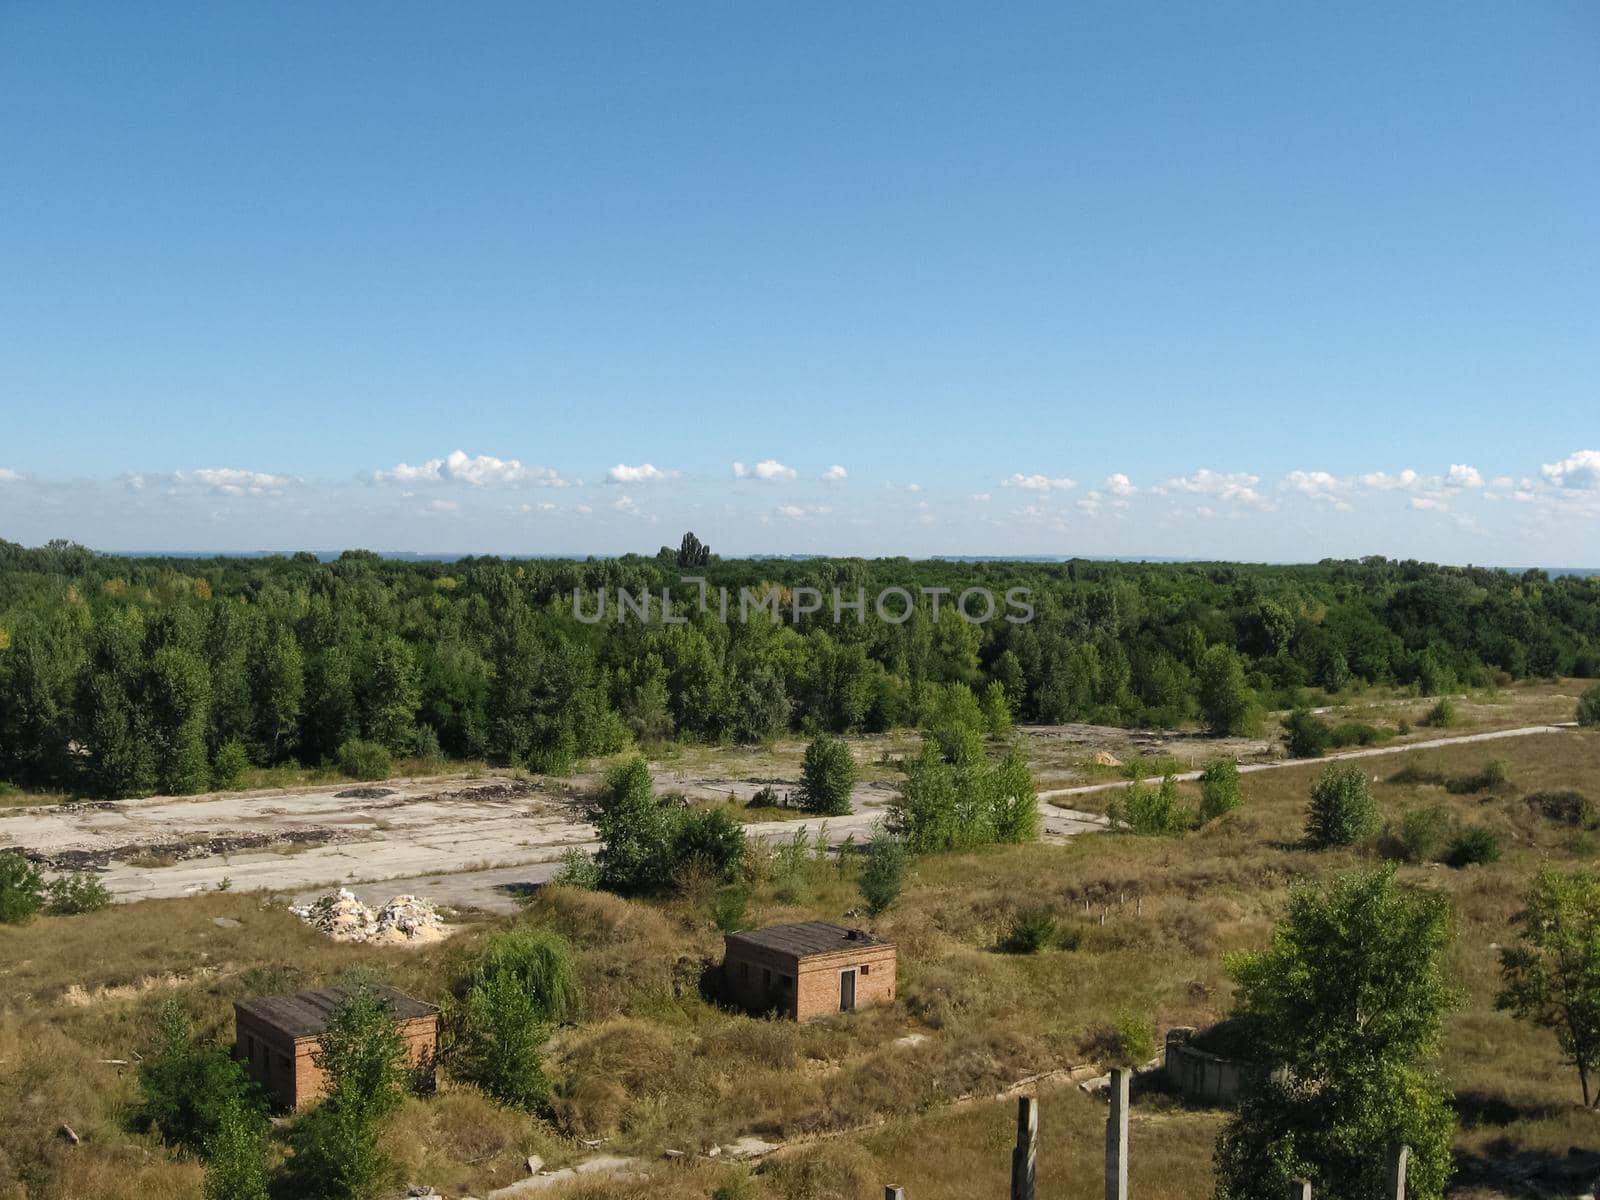 View from above on the site with old destroyed buildings, overgrown grass and trees.